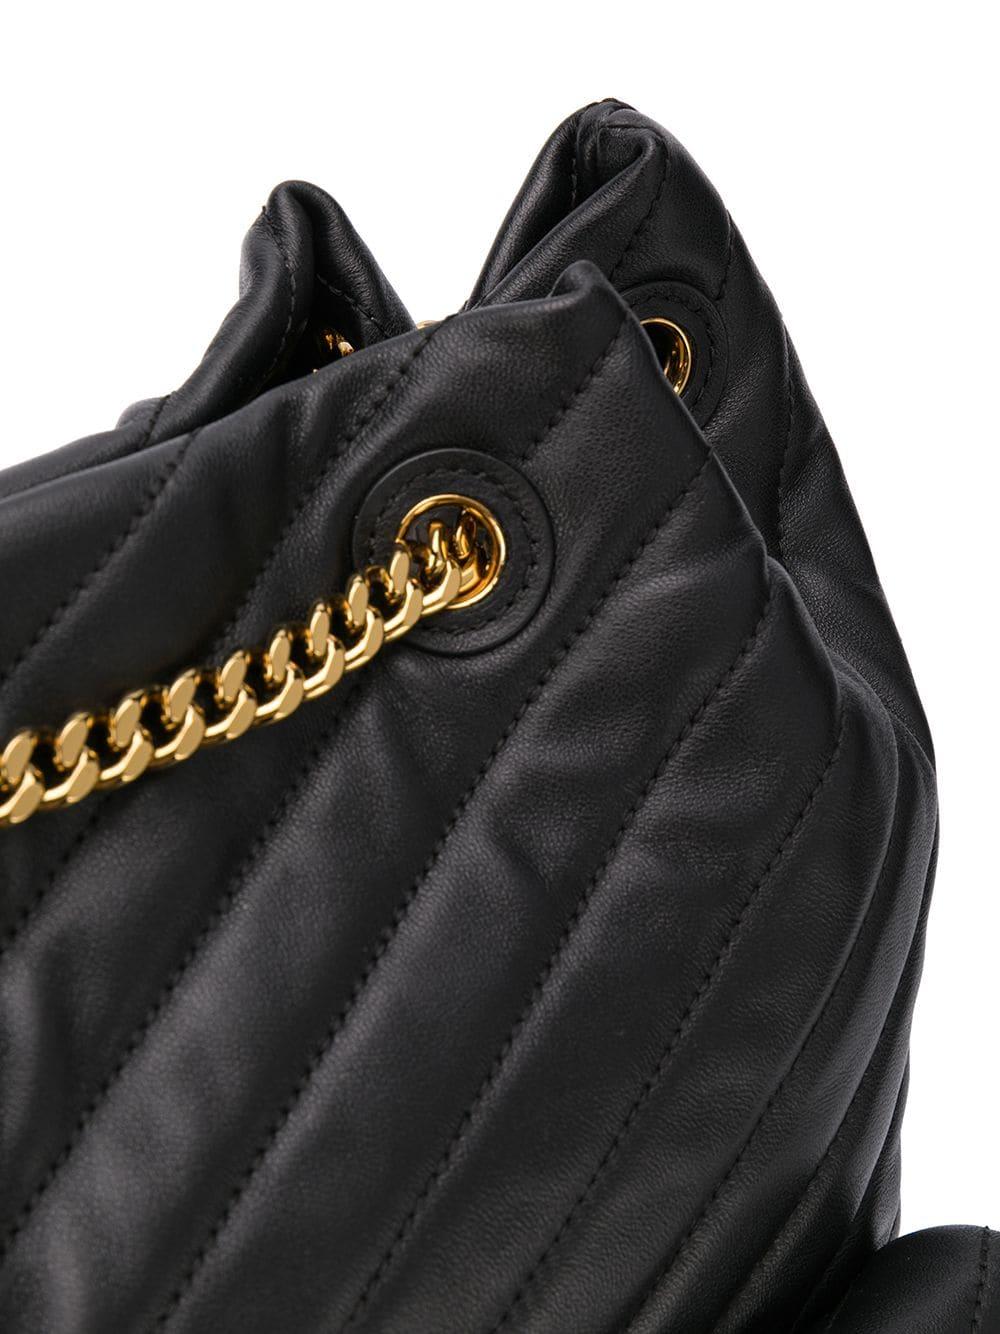 Tory Burch Kira Chevron Zip-Around Backpack Black One Size : Tory Burch:  : Bags, Wallets and Luggage